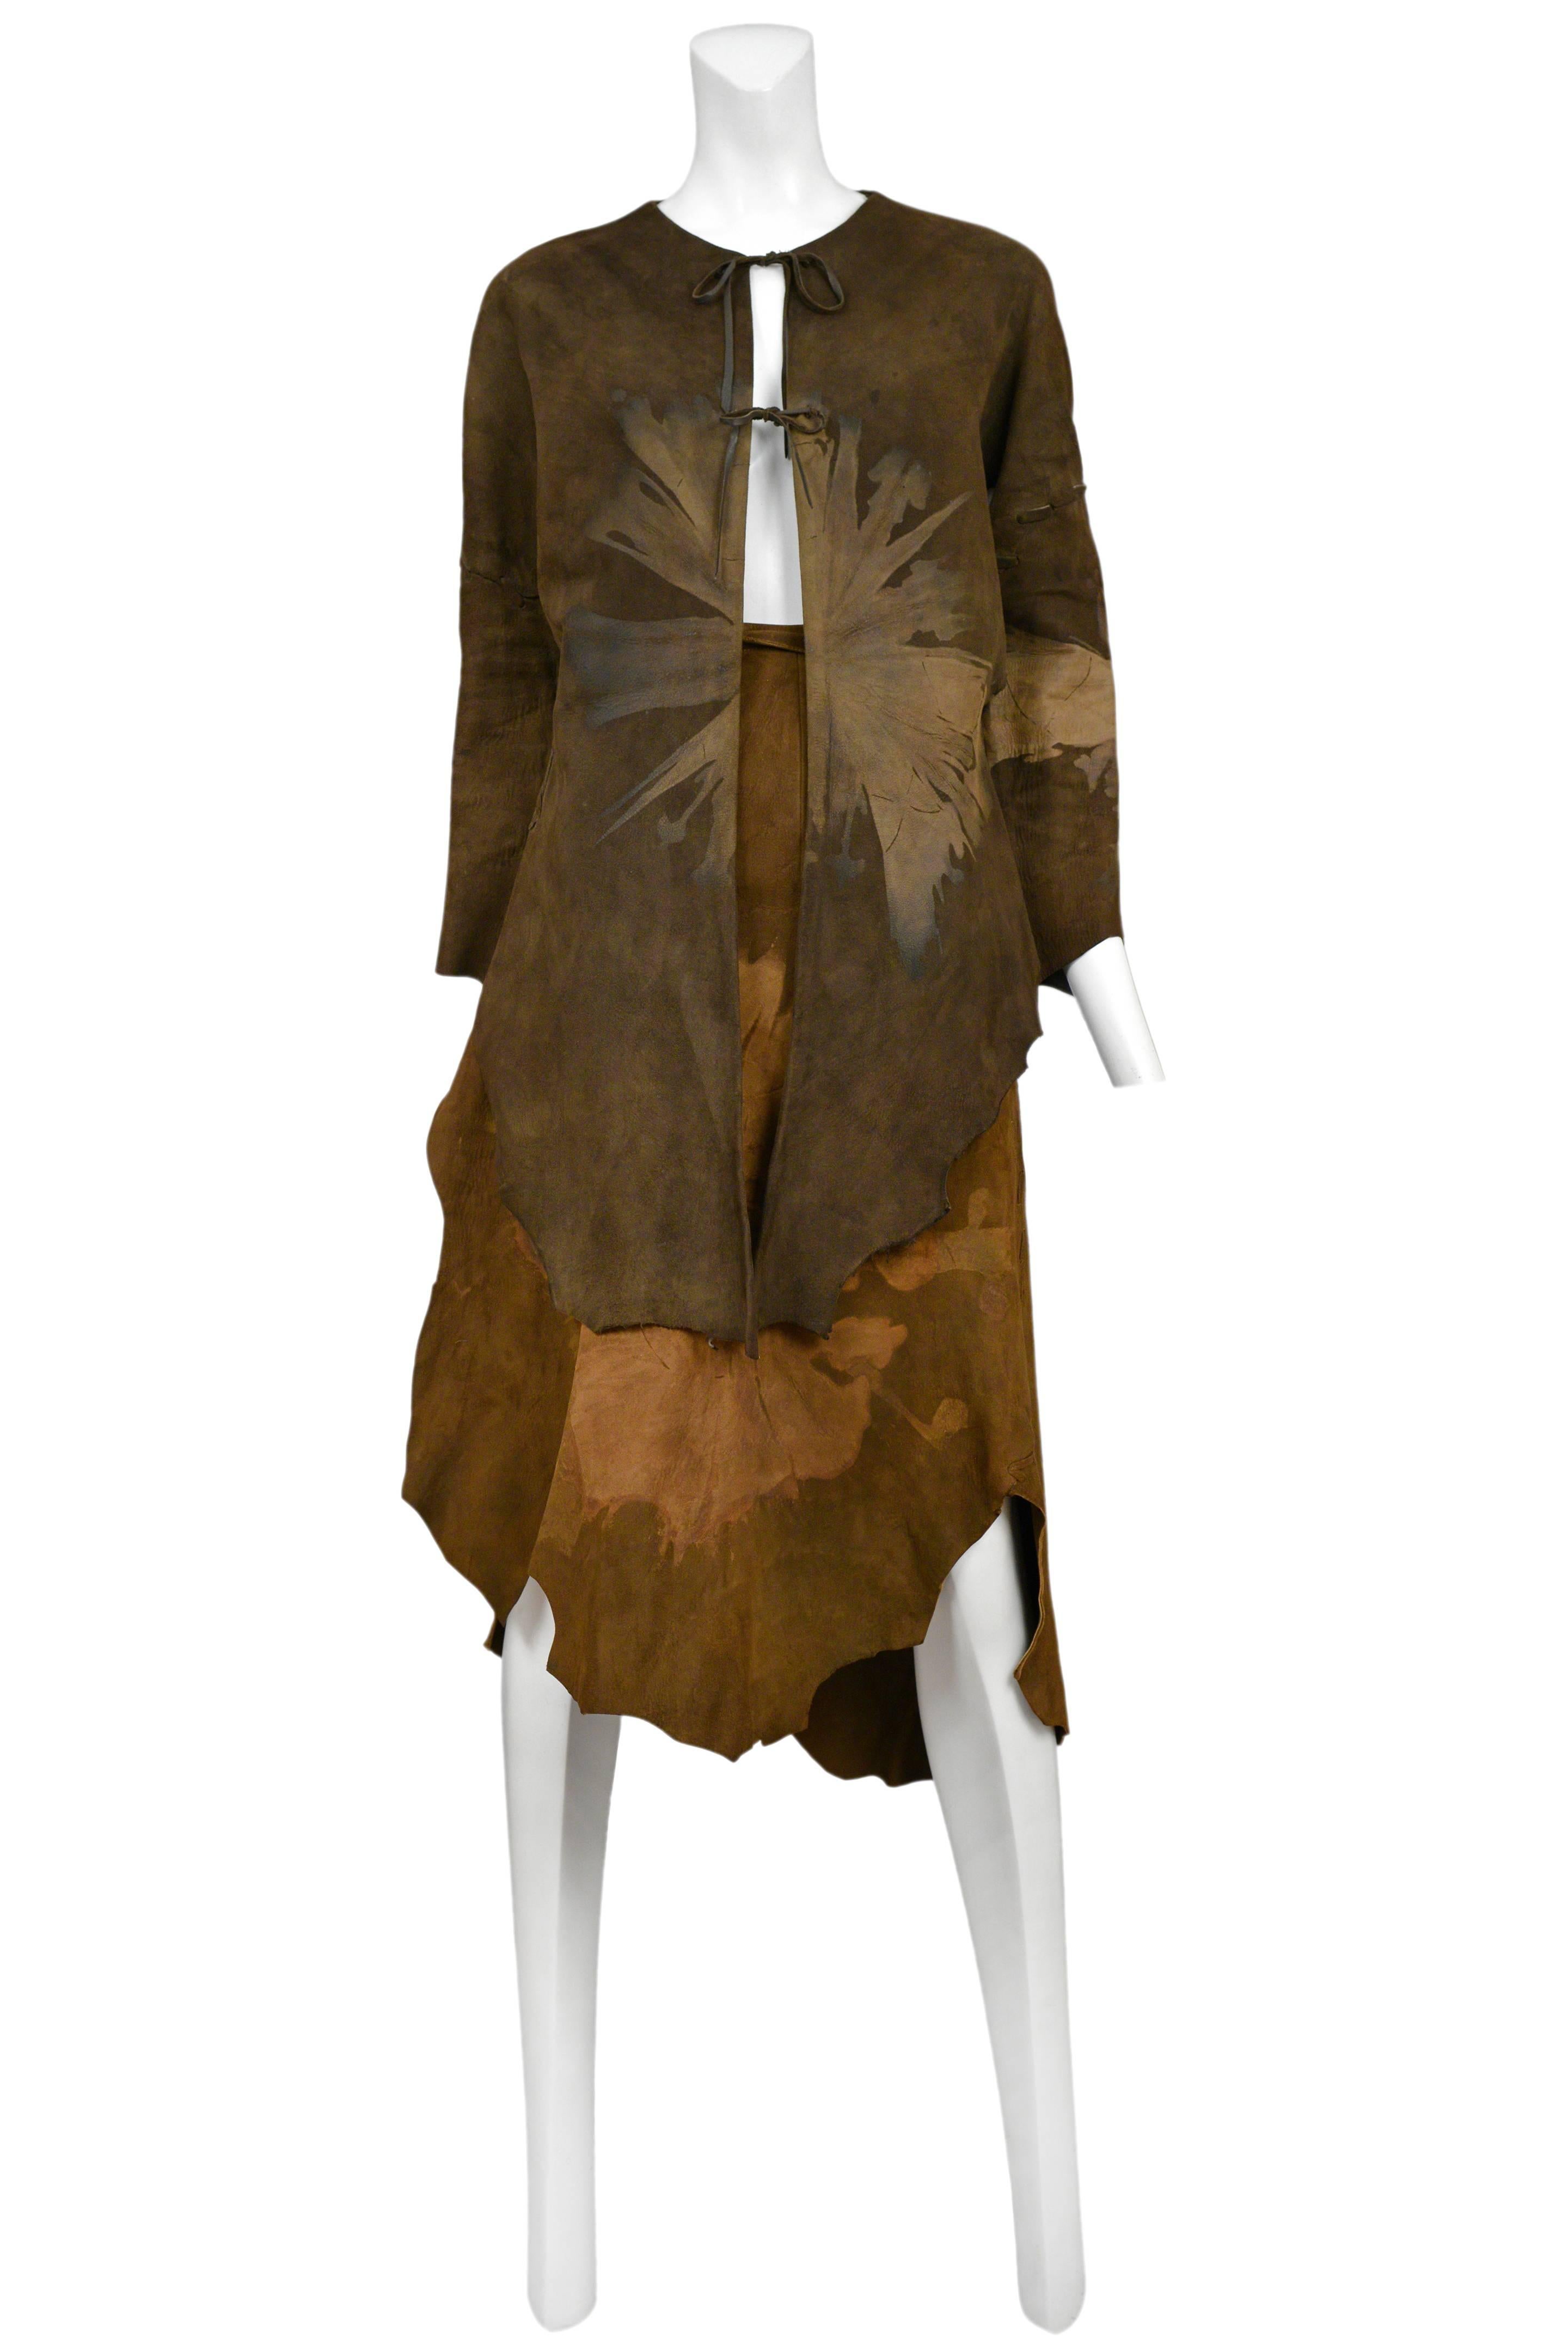 Vintage Giorgio Sant Angelo brown suede two piece ensemble featuring a jacket held together by two strings and a matching wrap skirt, both stamped with large fossil style prints.
Please inquire for additional images.